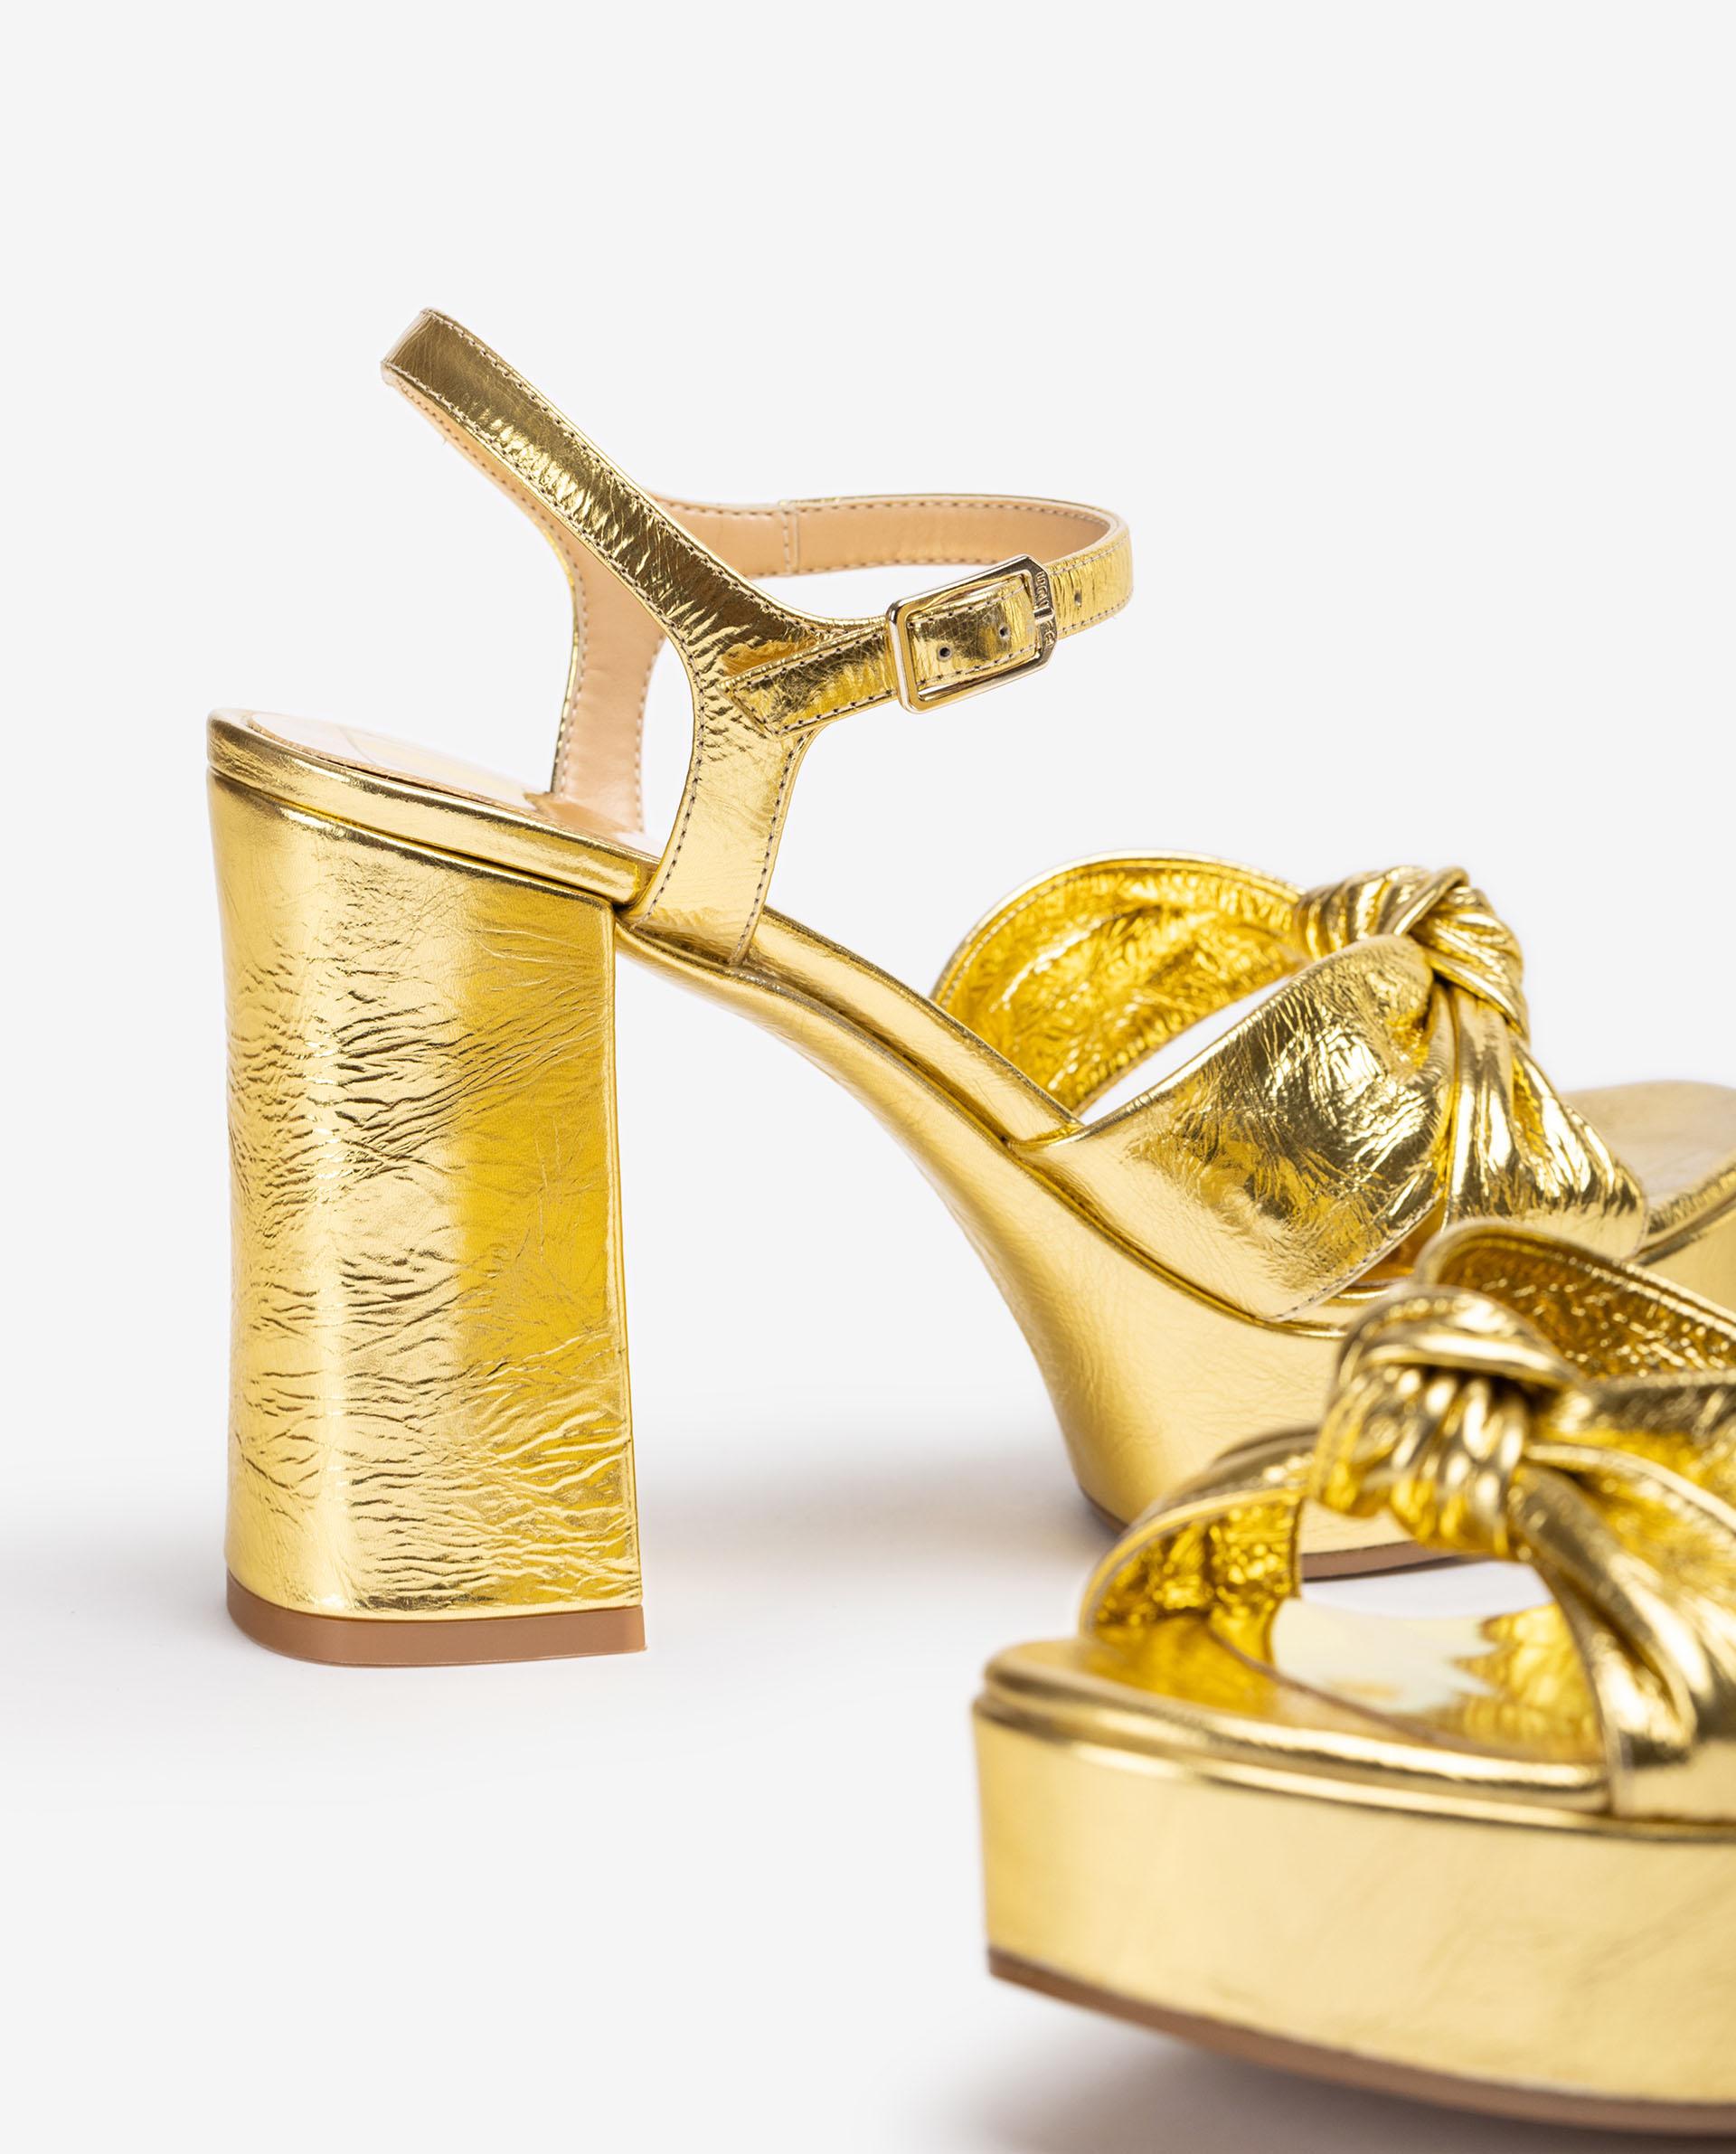 Unisa Unisa by Cherubina | Heeled Sandals and Party Shoes VIVIEN_MER gold